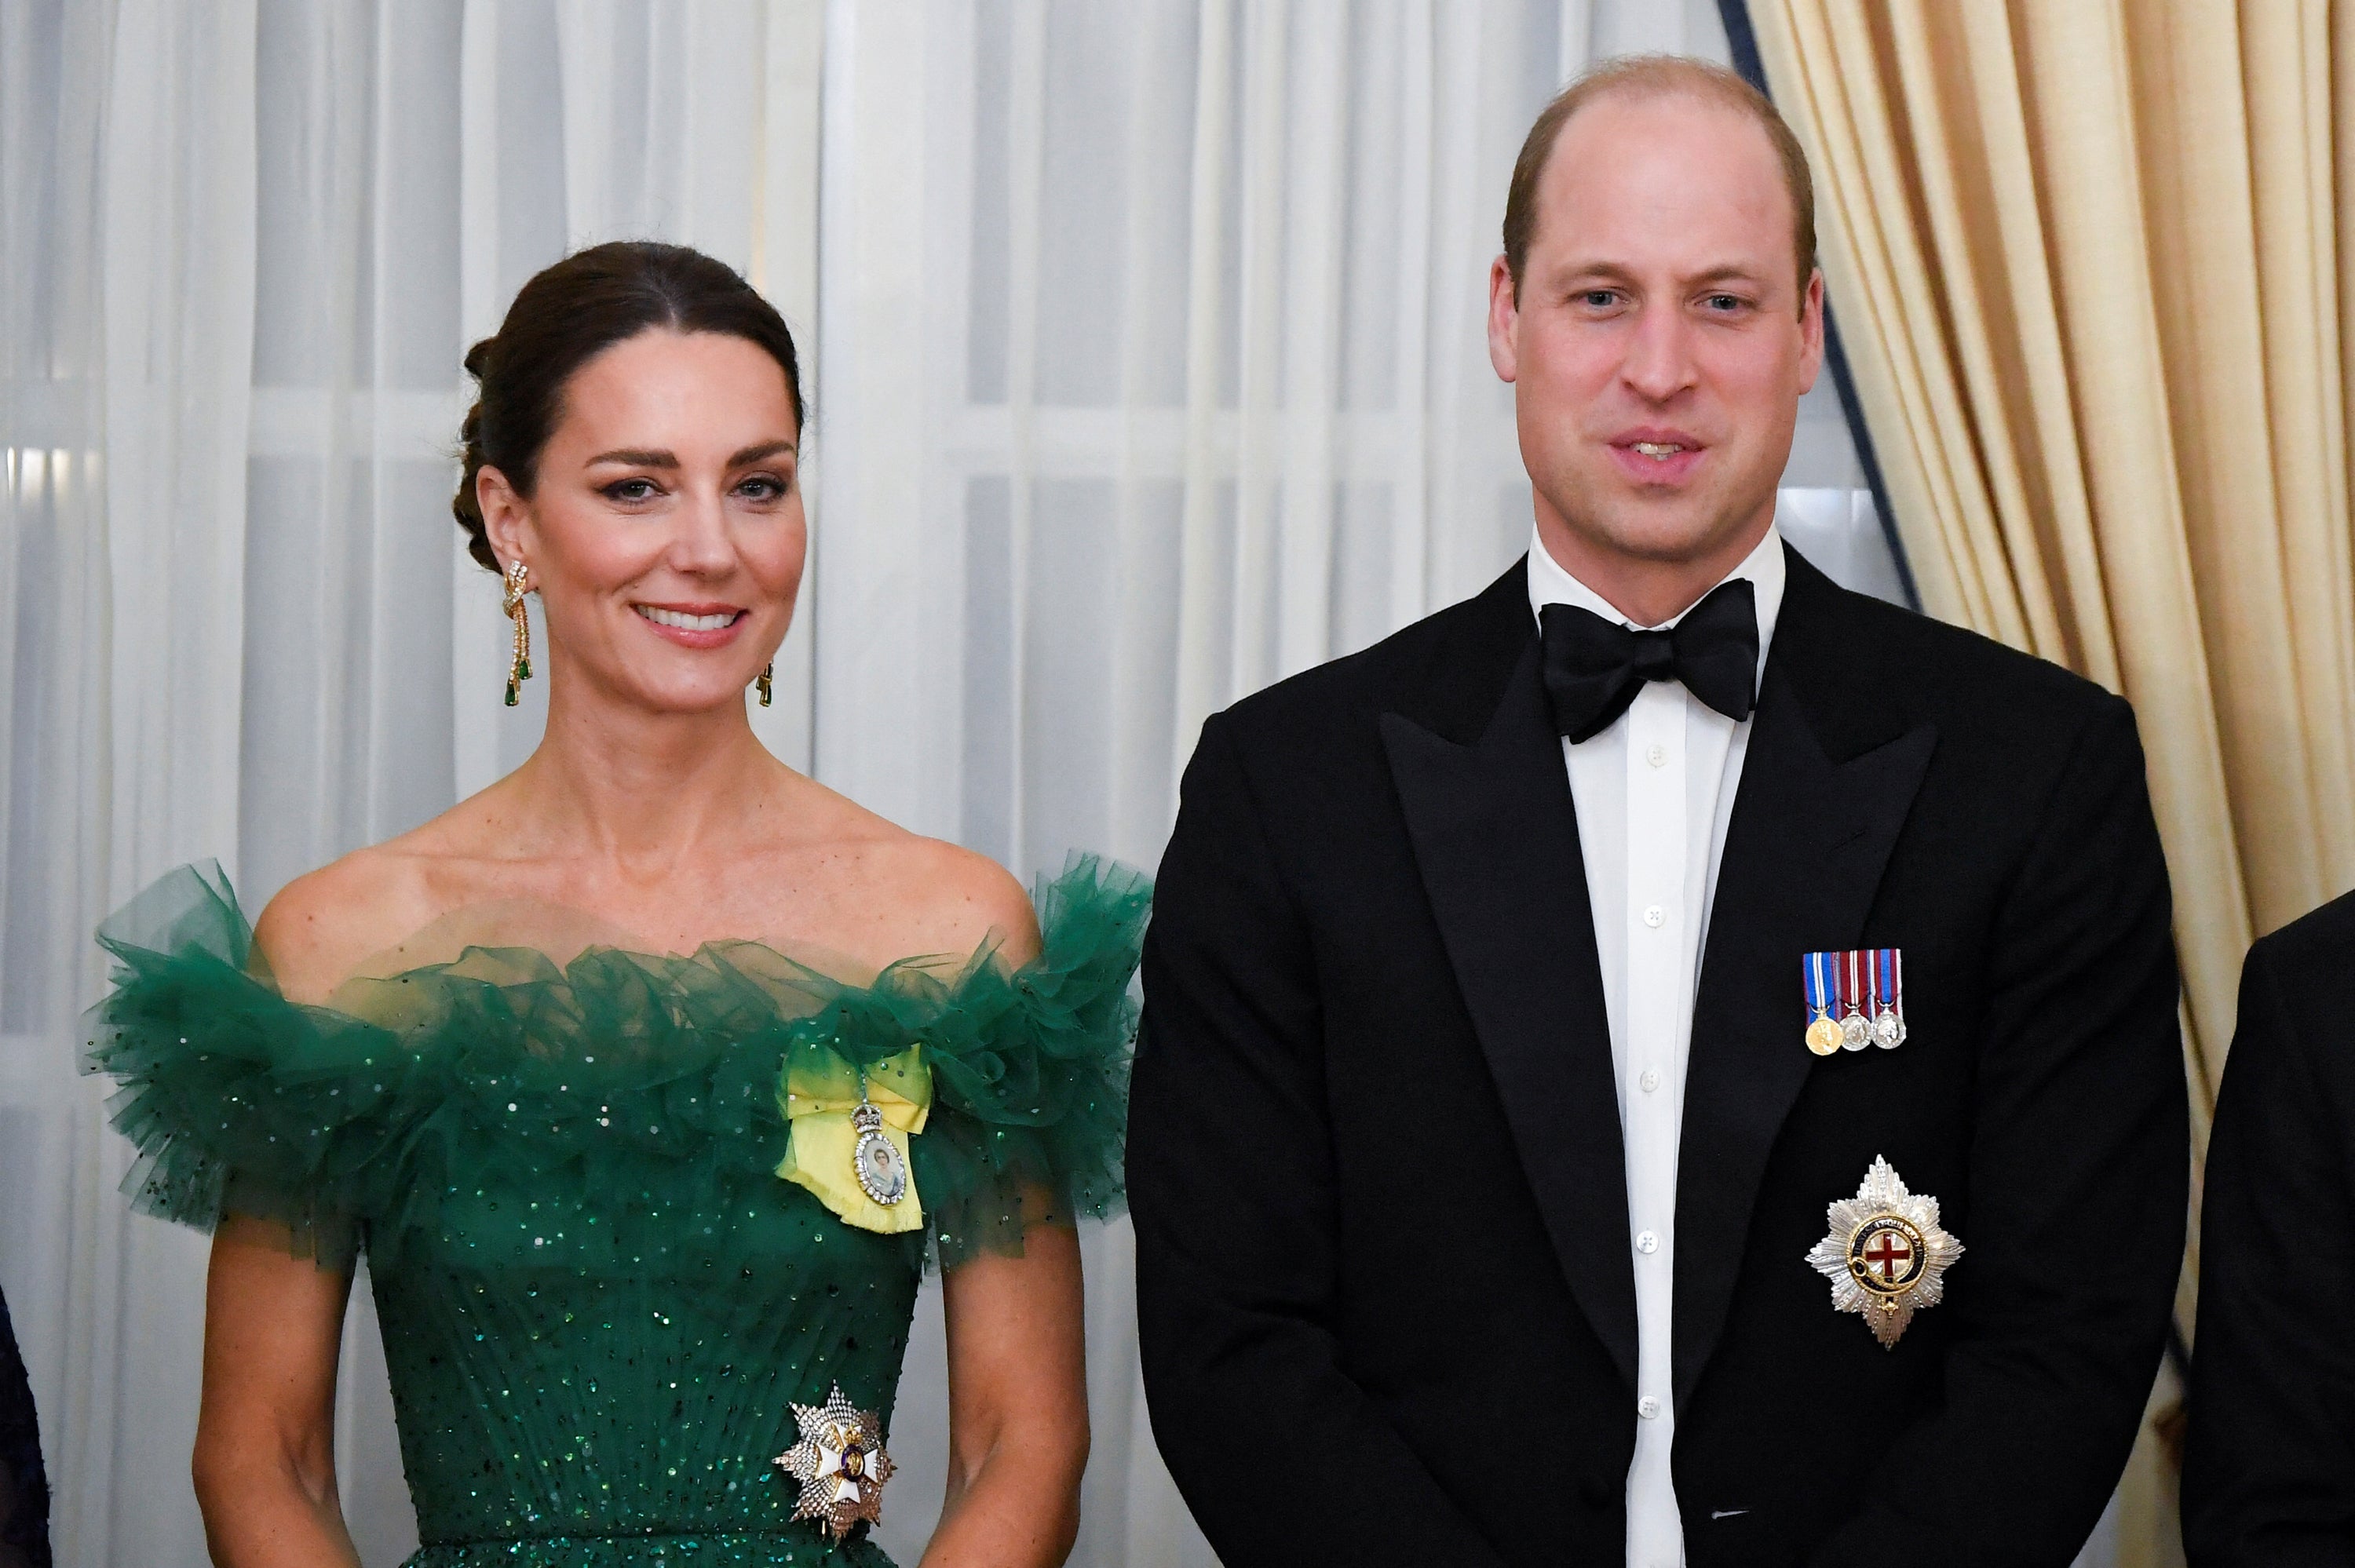 The Duke of Cambridge has denounced slavery as ‘abhorrent’ saying ‘it should never have happened’ as he addressed the issue following days of protests calling for reparations from the royal family (PA)